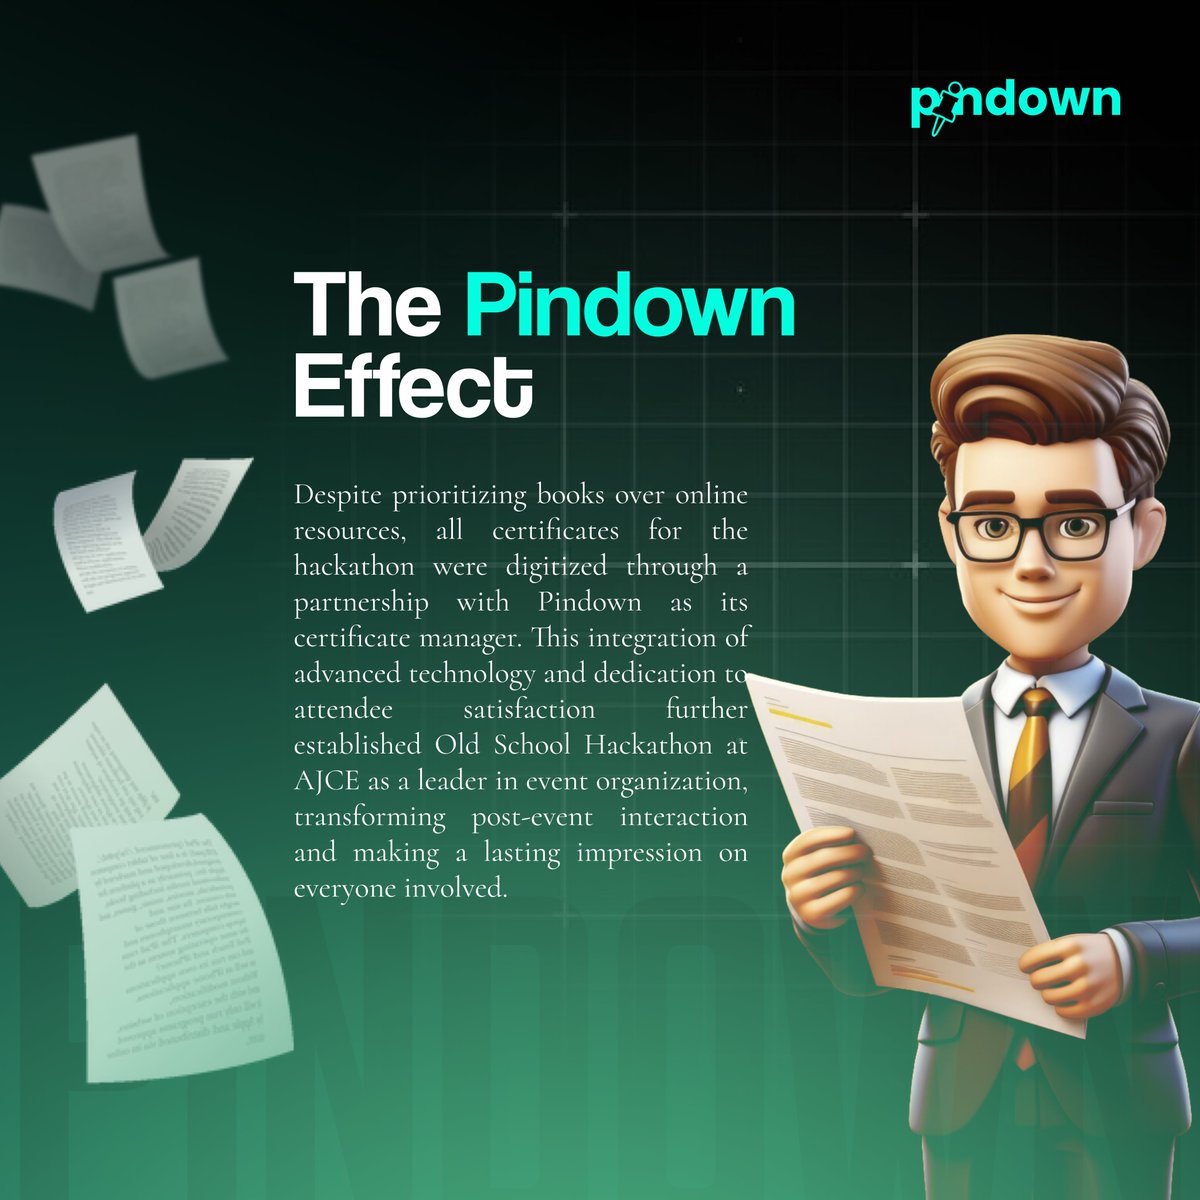 🎉 Keep an eye out as we uncover the innovative strategies behind AJCE's Old School Hackathon, powered by Pindown! Learn more about the insights into their event planning success story. #Pindown #OldSchoolHackathon #EventTech #Innovation